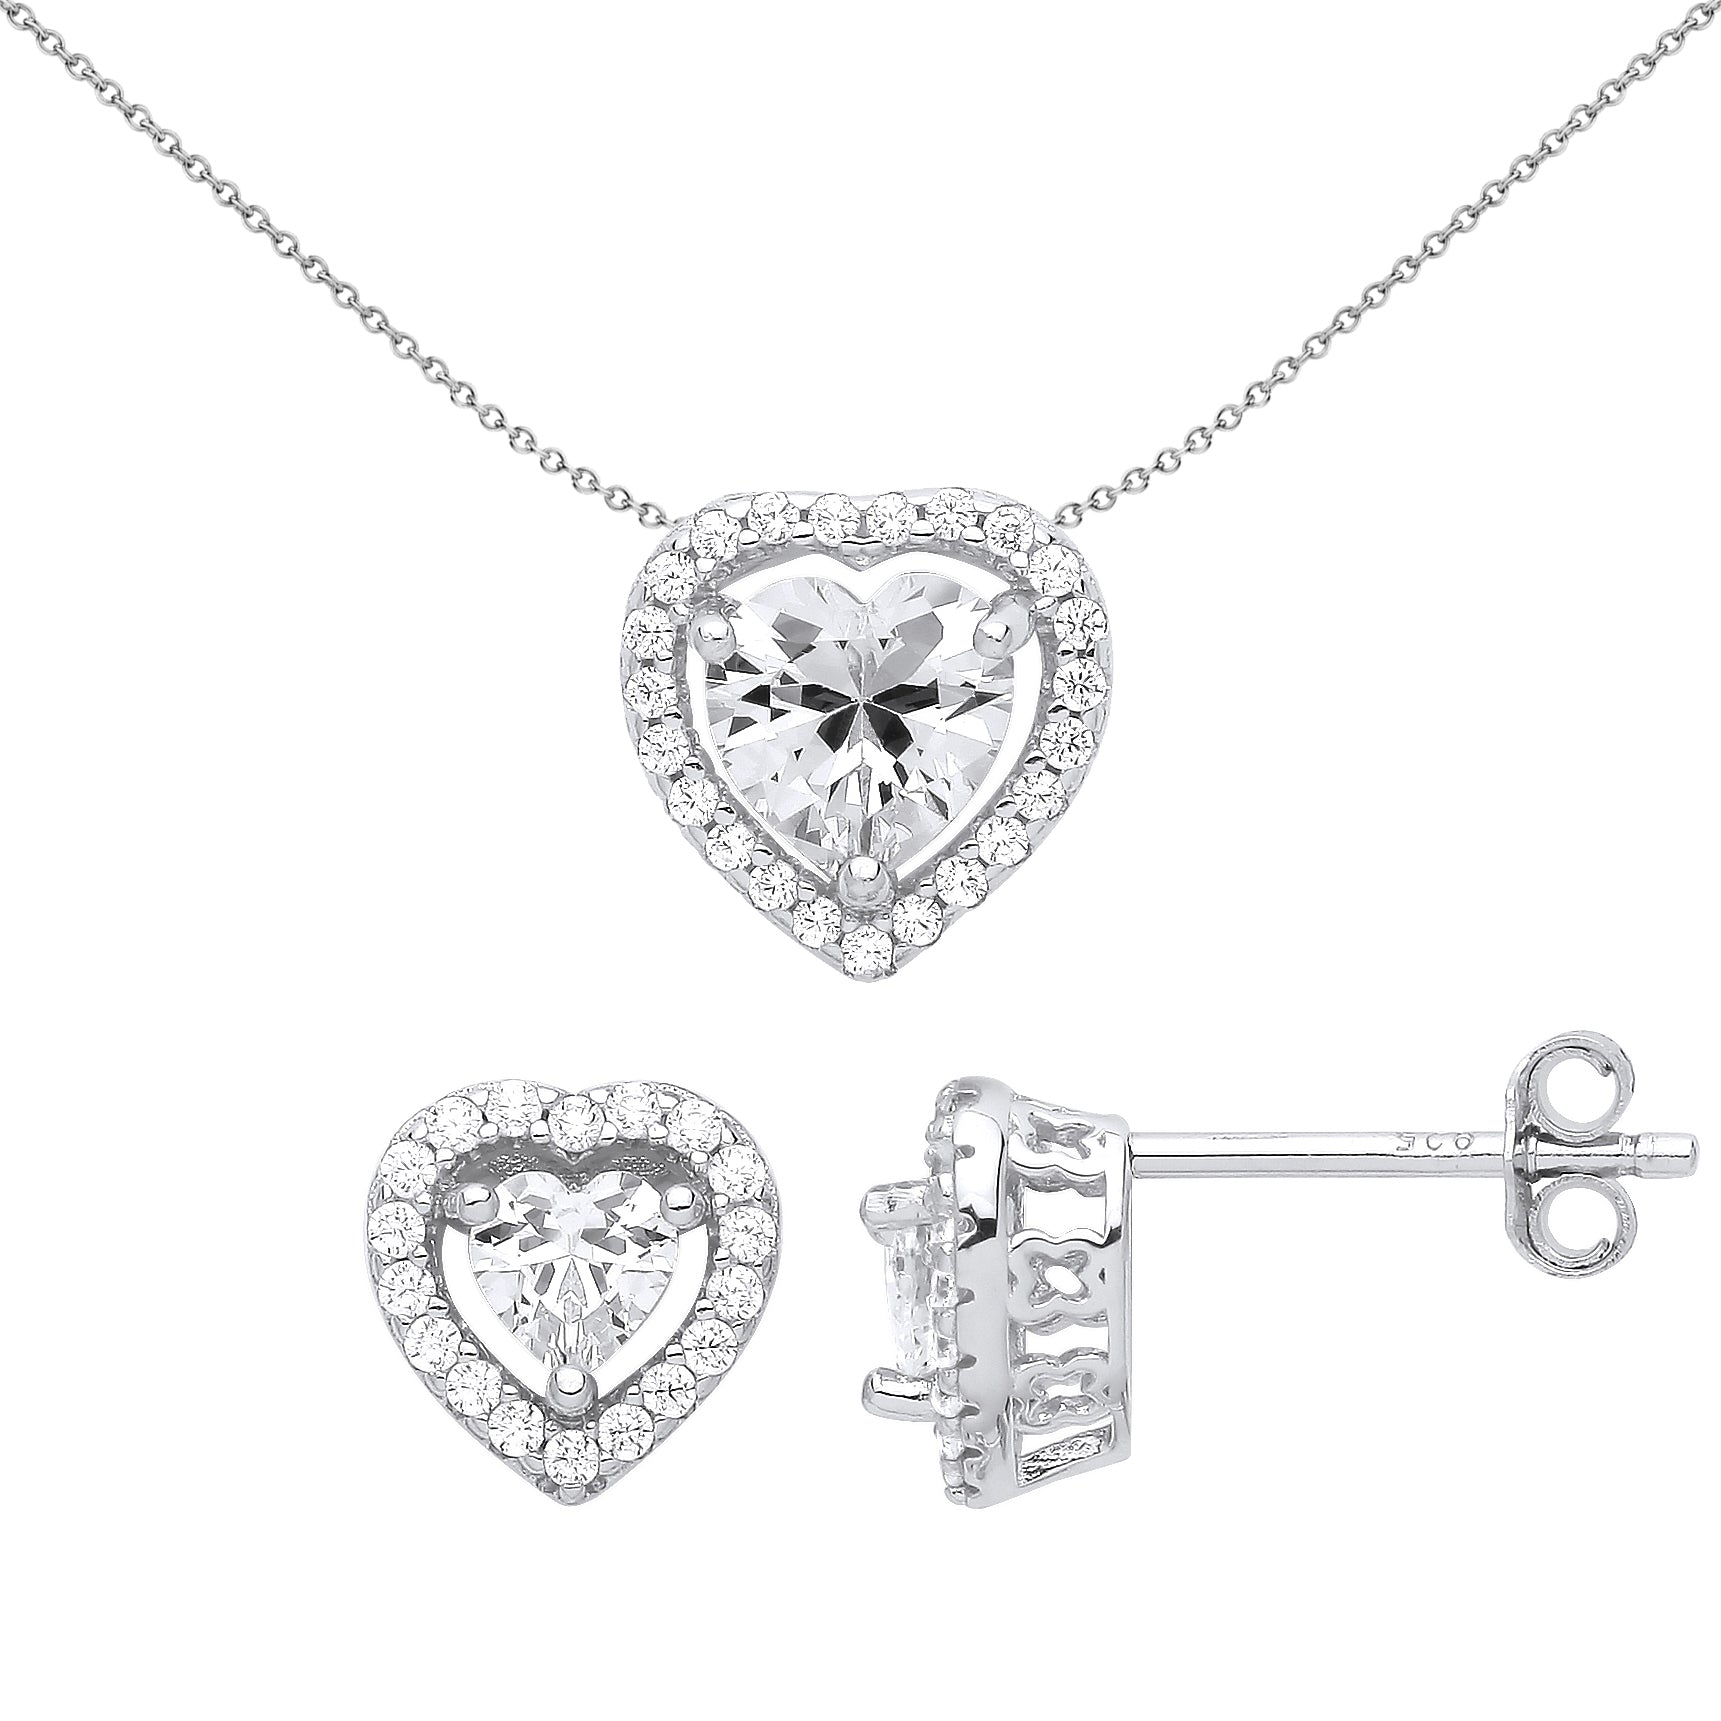 Silver  Love Heart Halo Earrings Necklace Set - GSET622